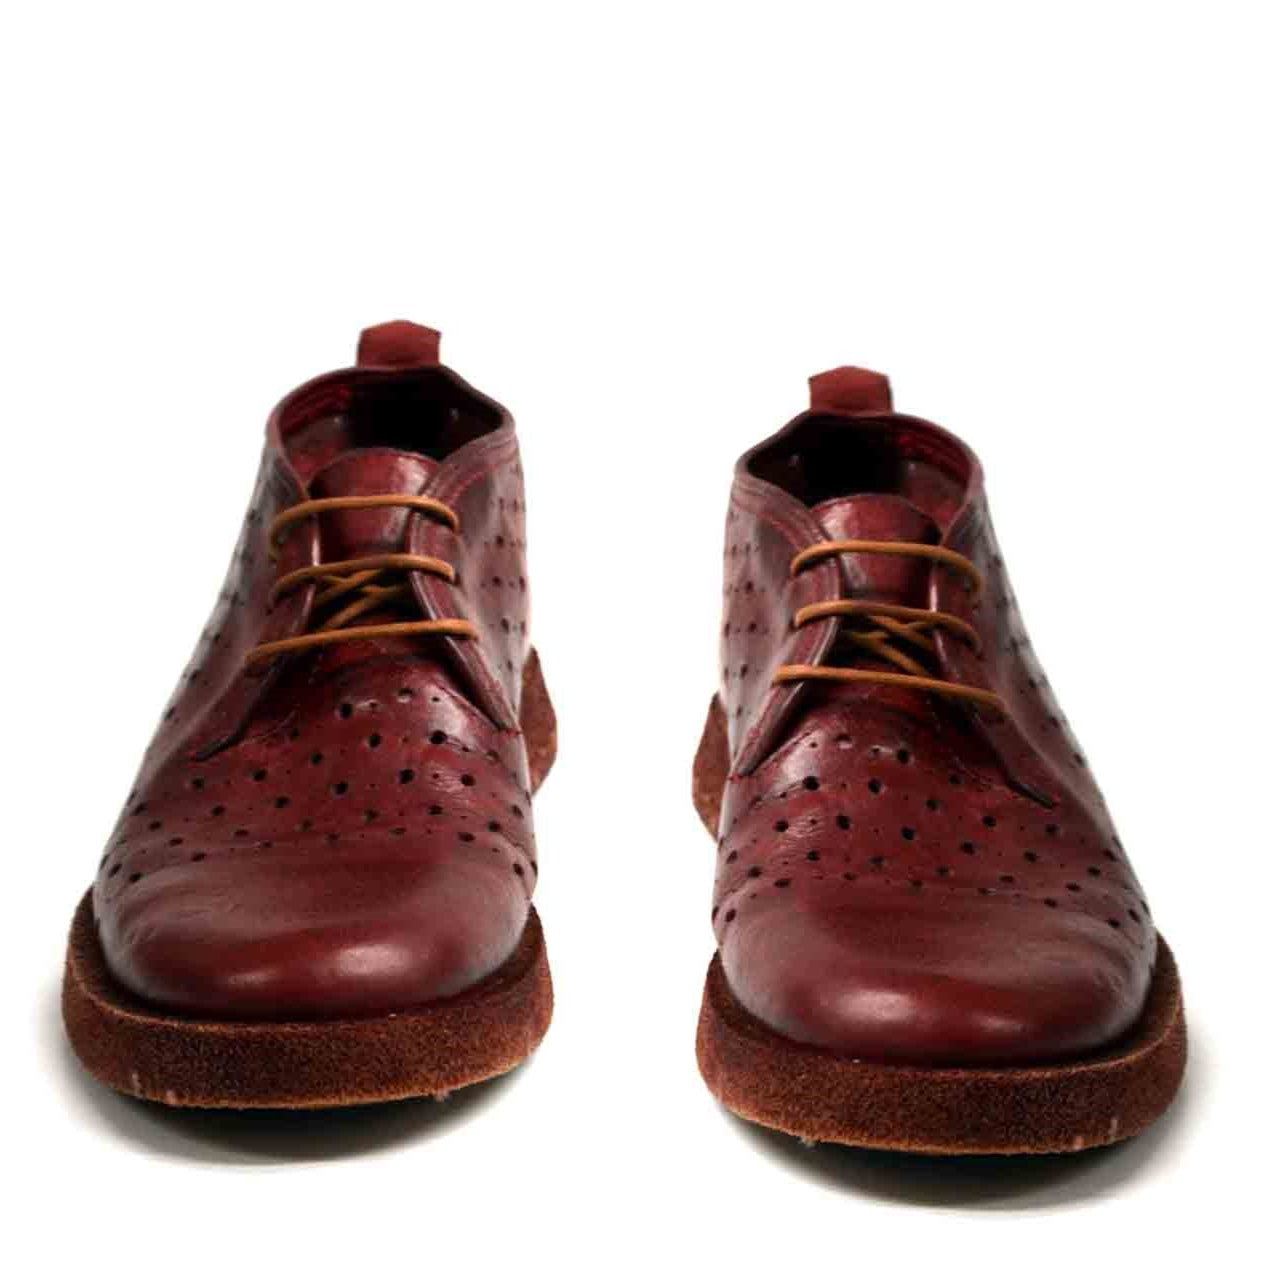 PERFORATED RED RUBREX SHOES